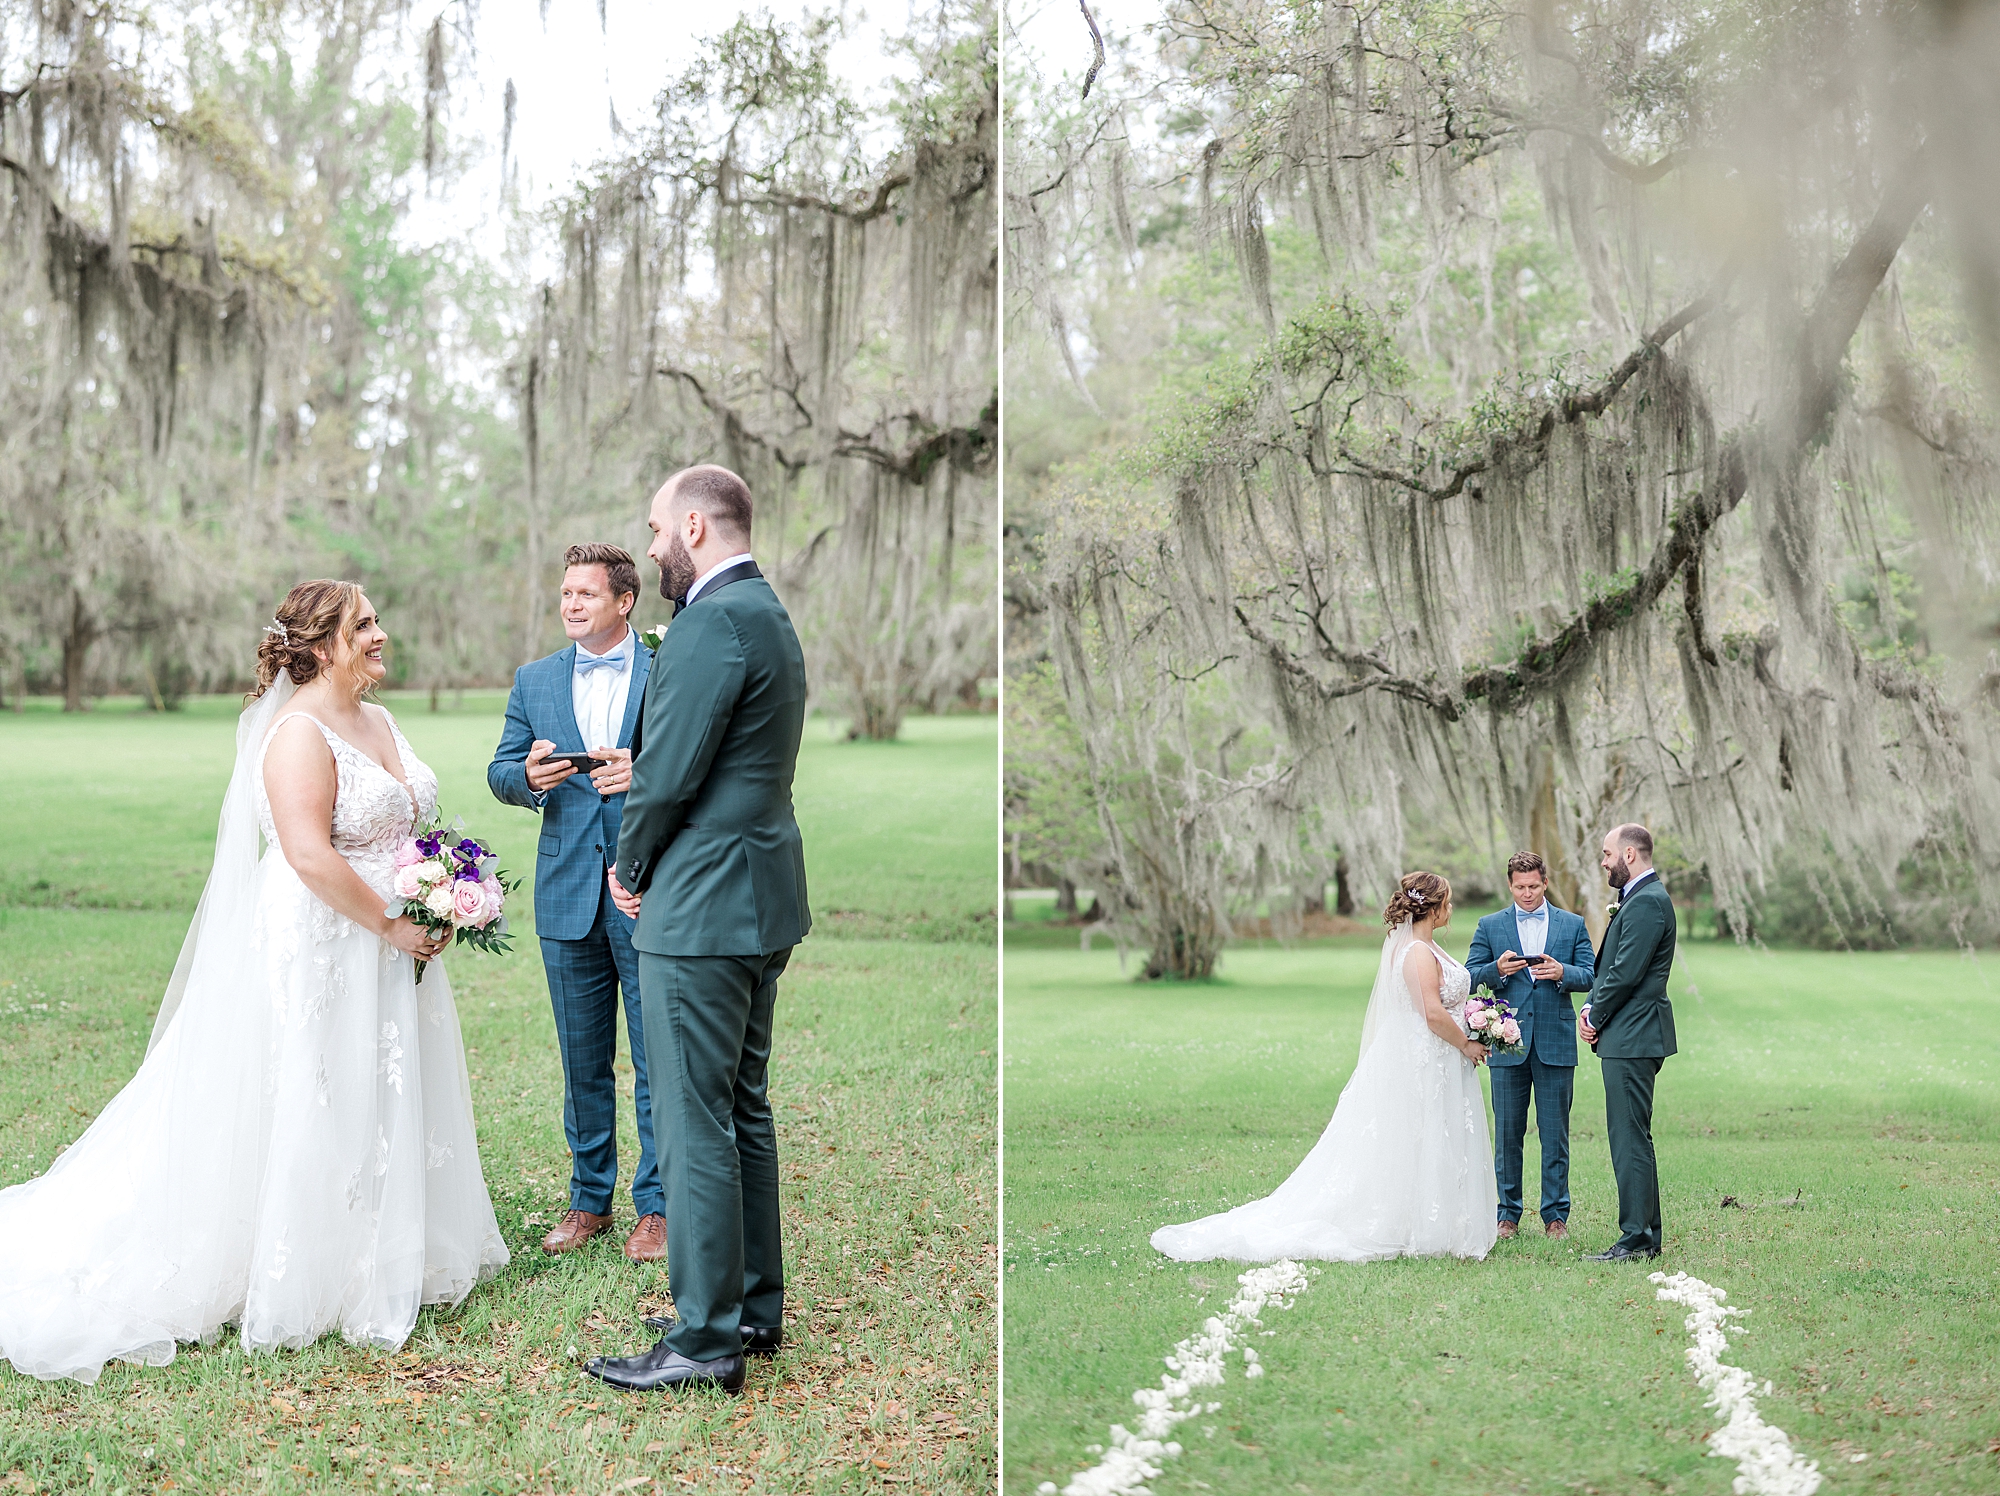 couple exchange vows during intimate elopement ceremony